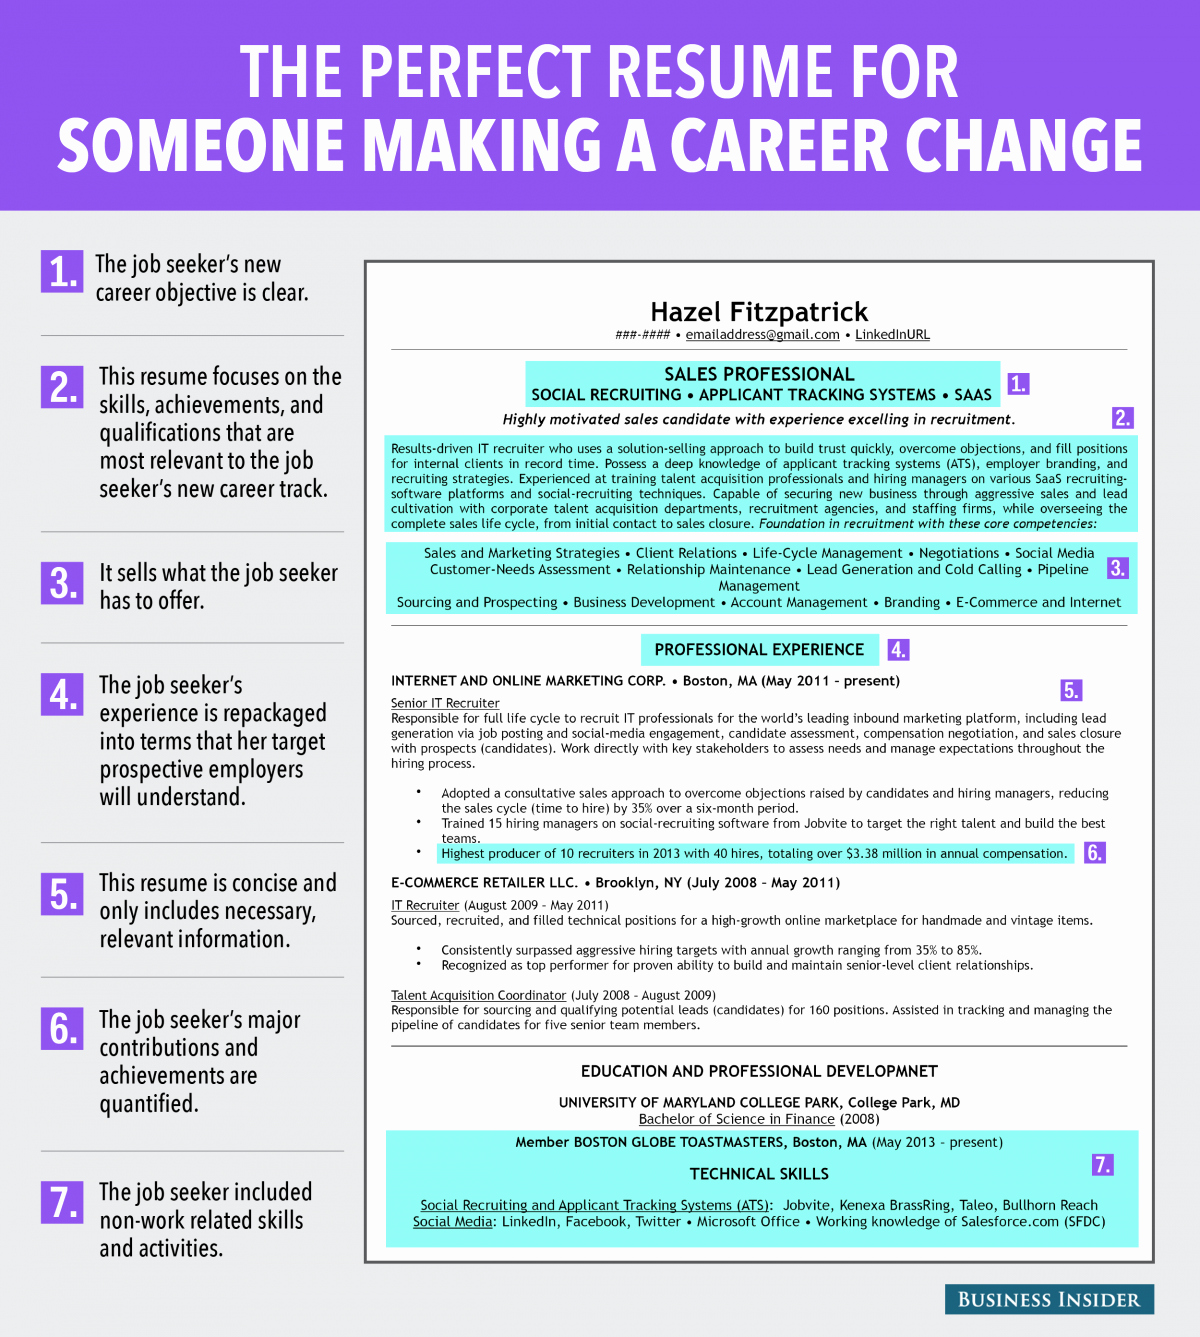 Ideal Resume for someone Making A Career Change Business